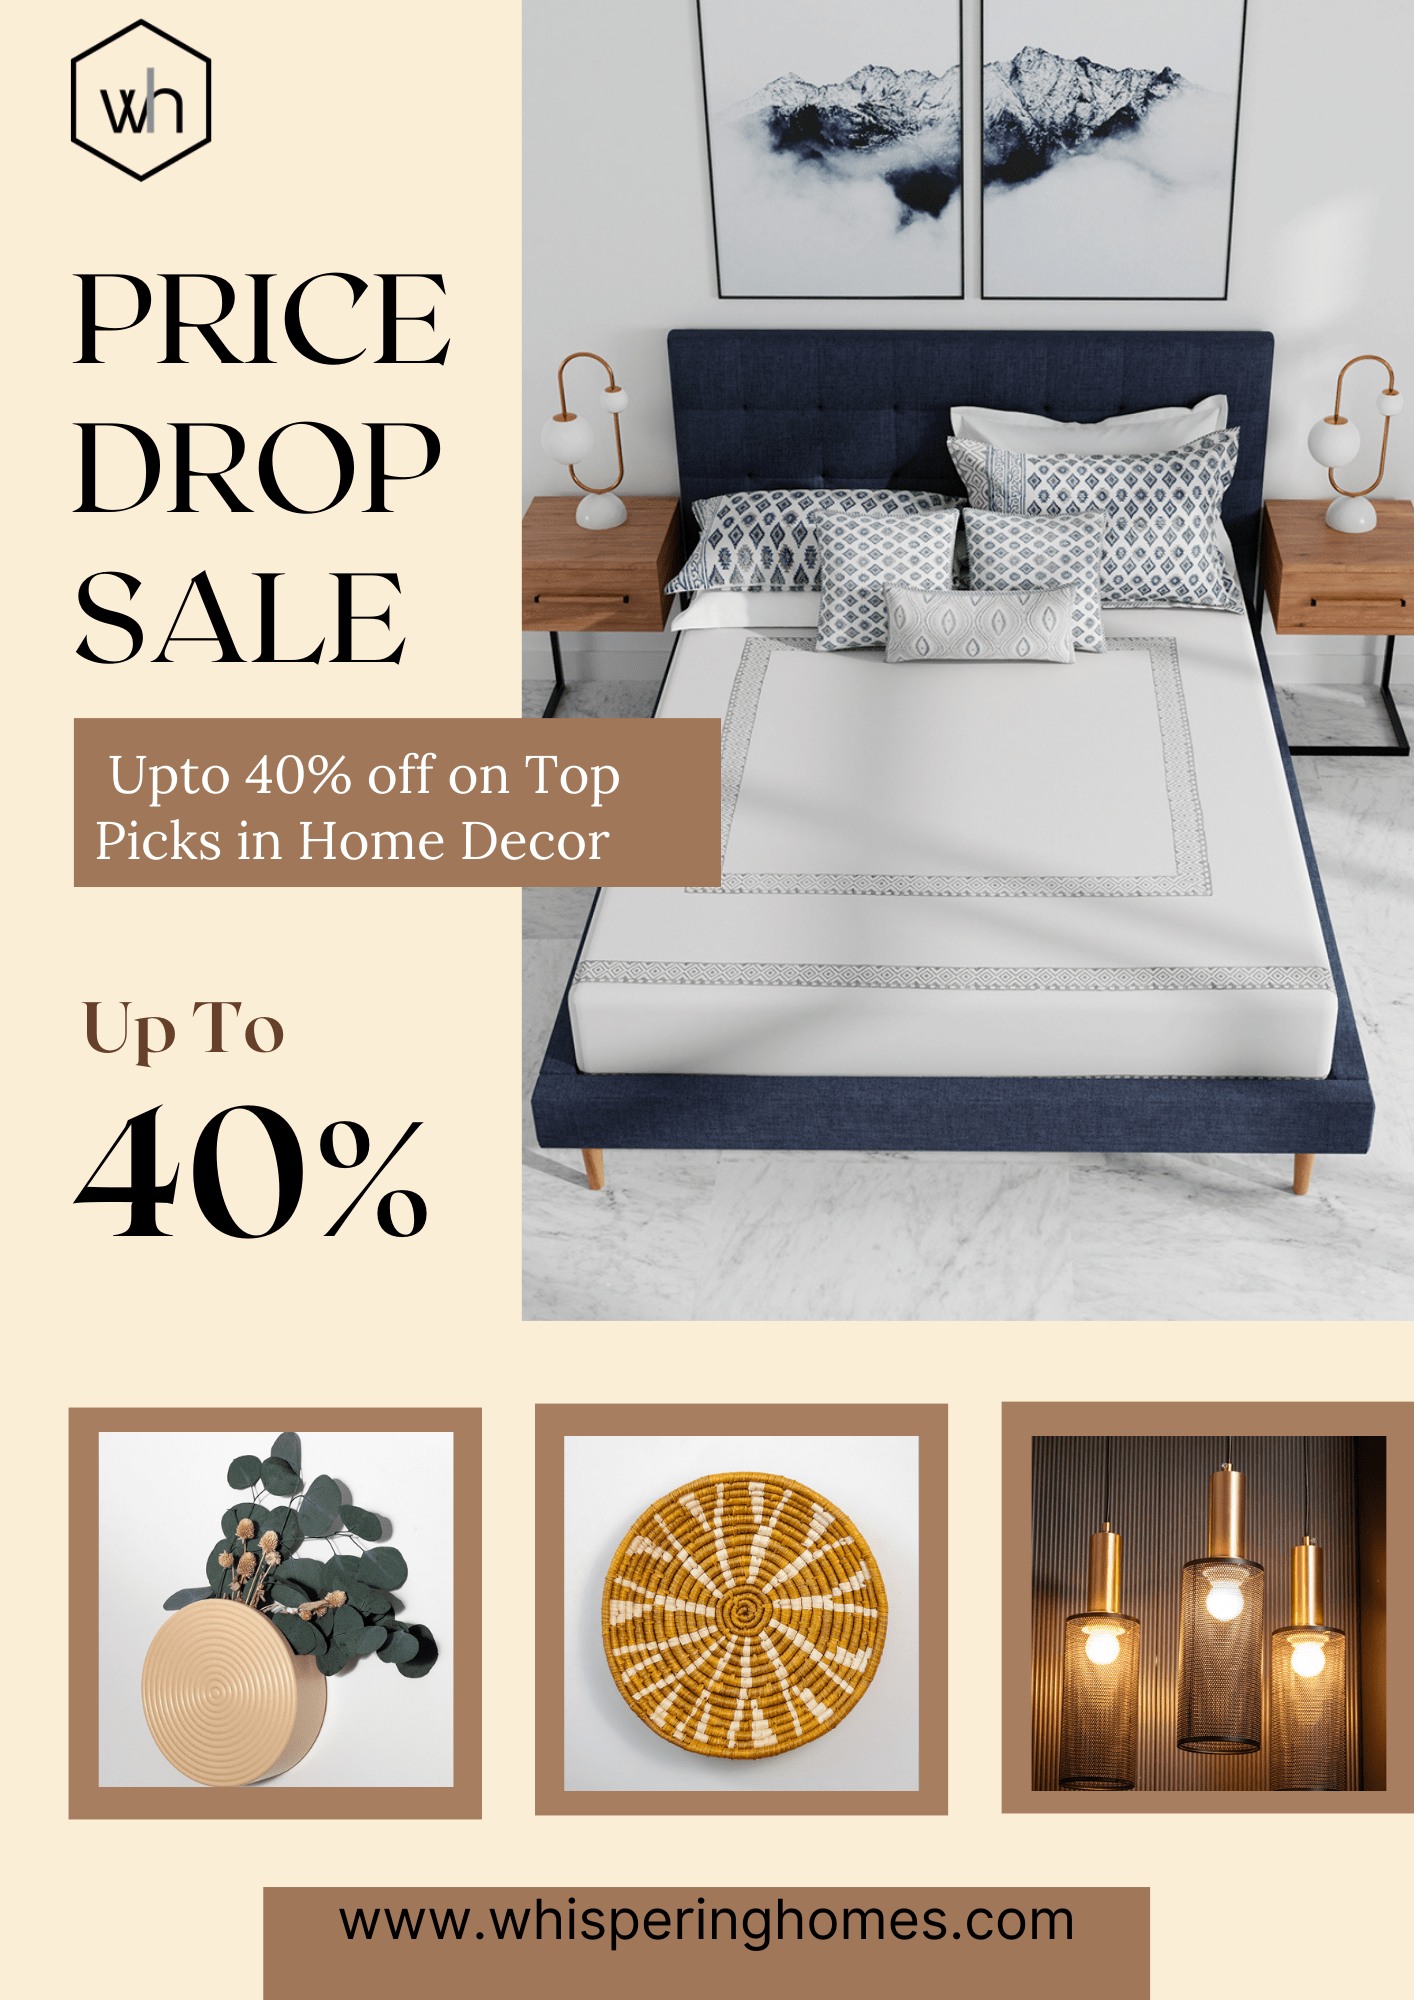 Luxury Home Decor Items Price Drop Sale Online in India at Whispering Homes